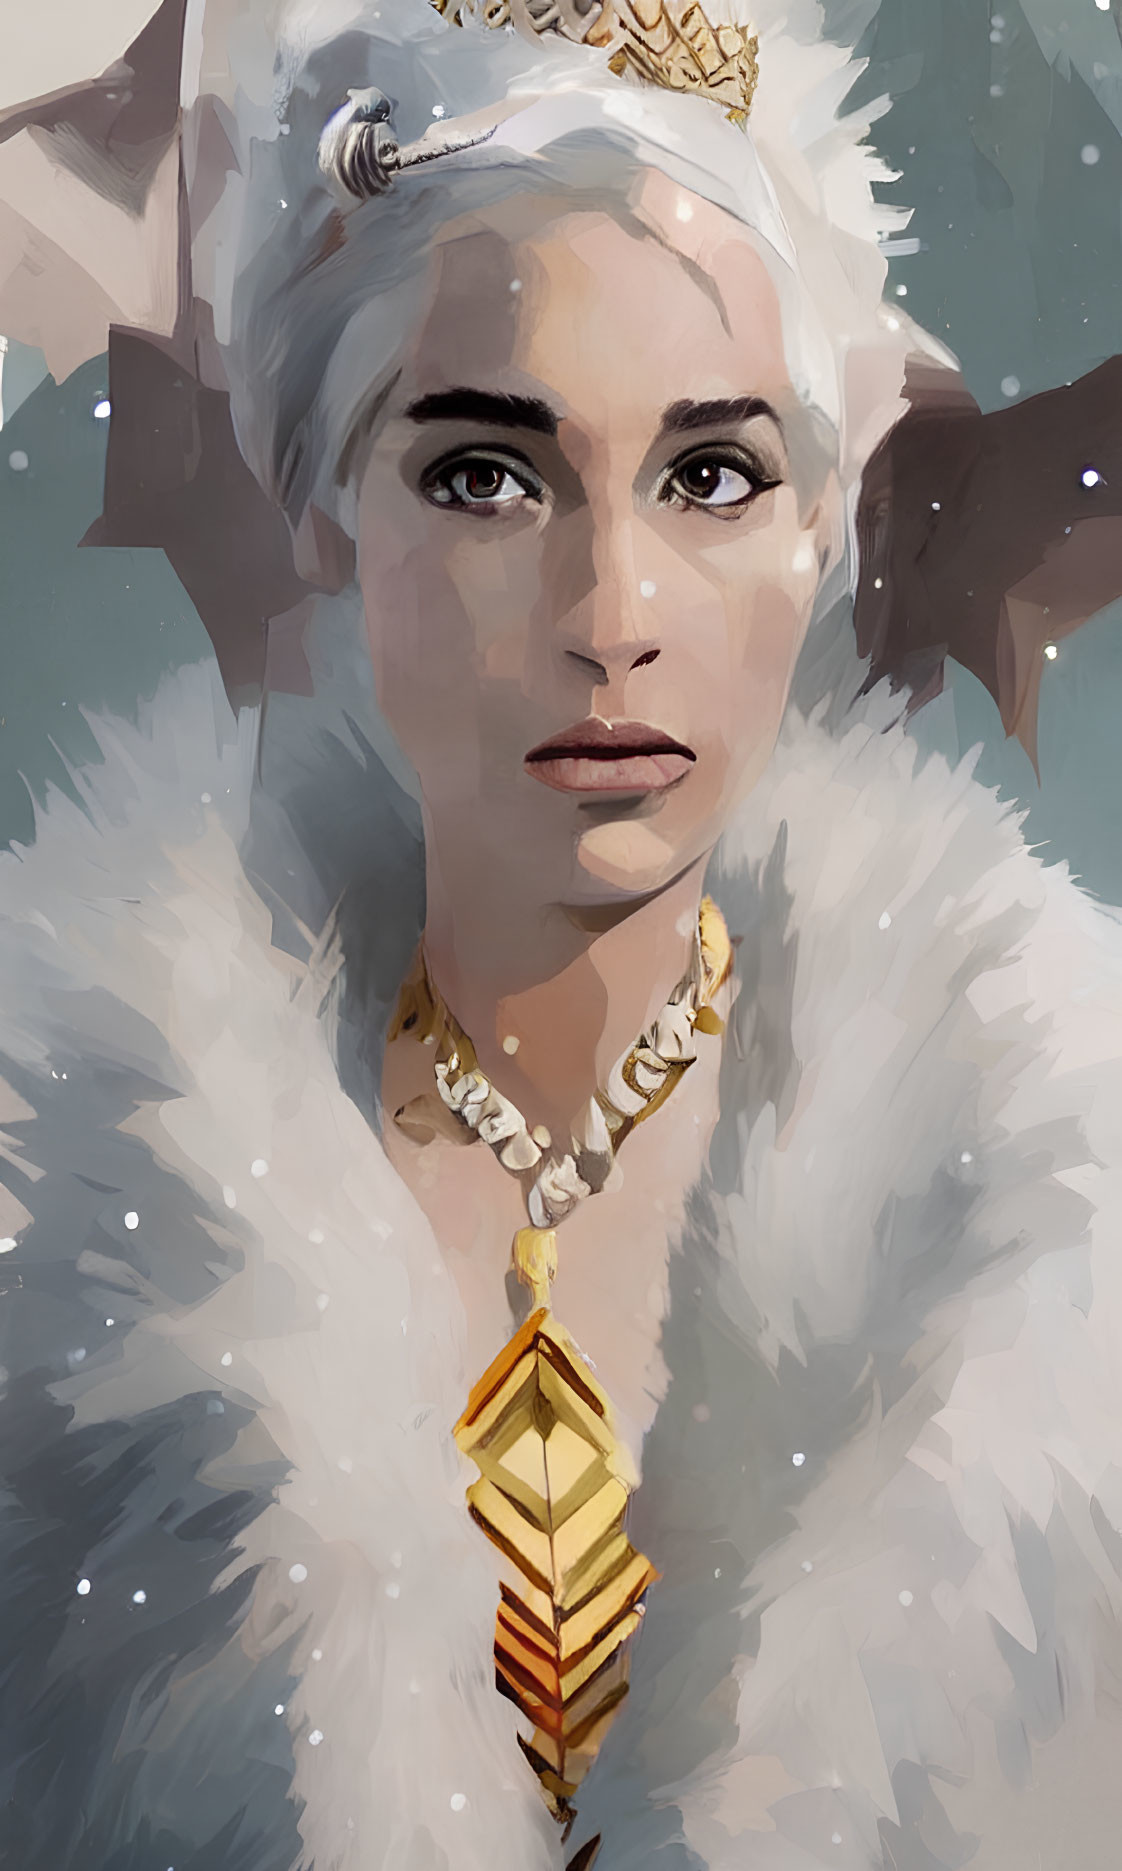 Regal woman with crown and fur cloak in digital painting